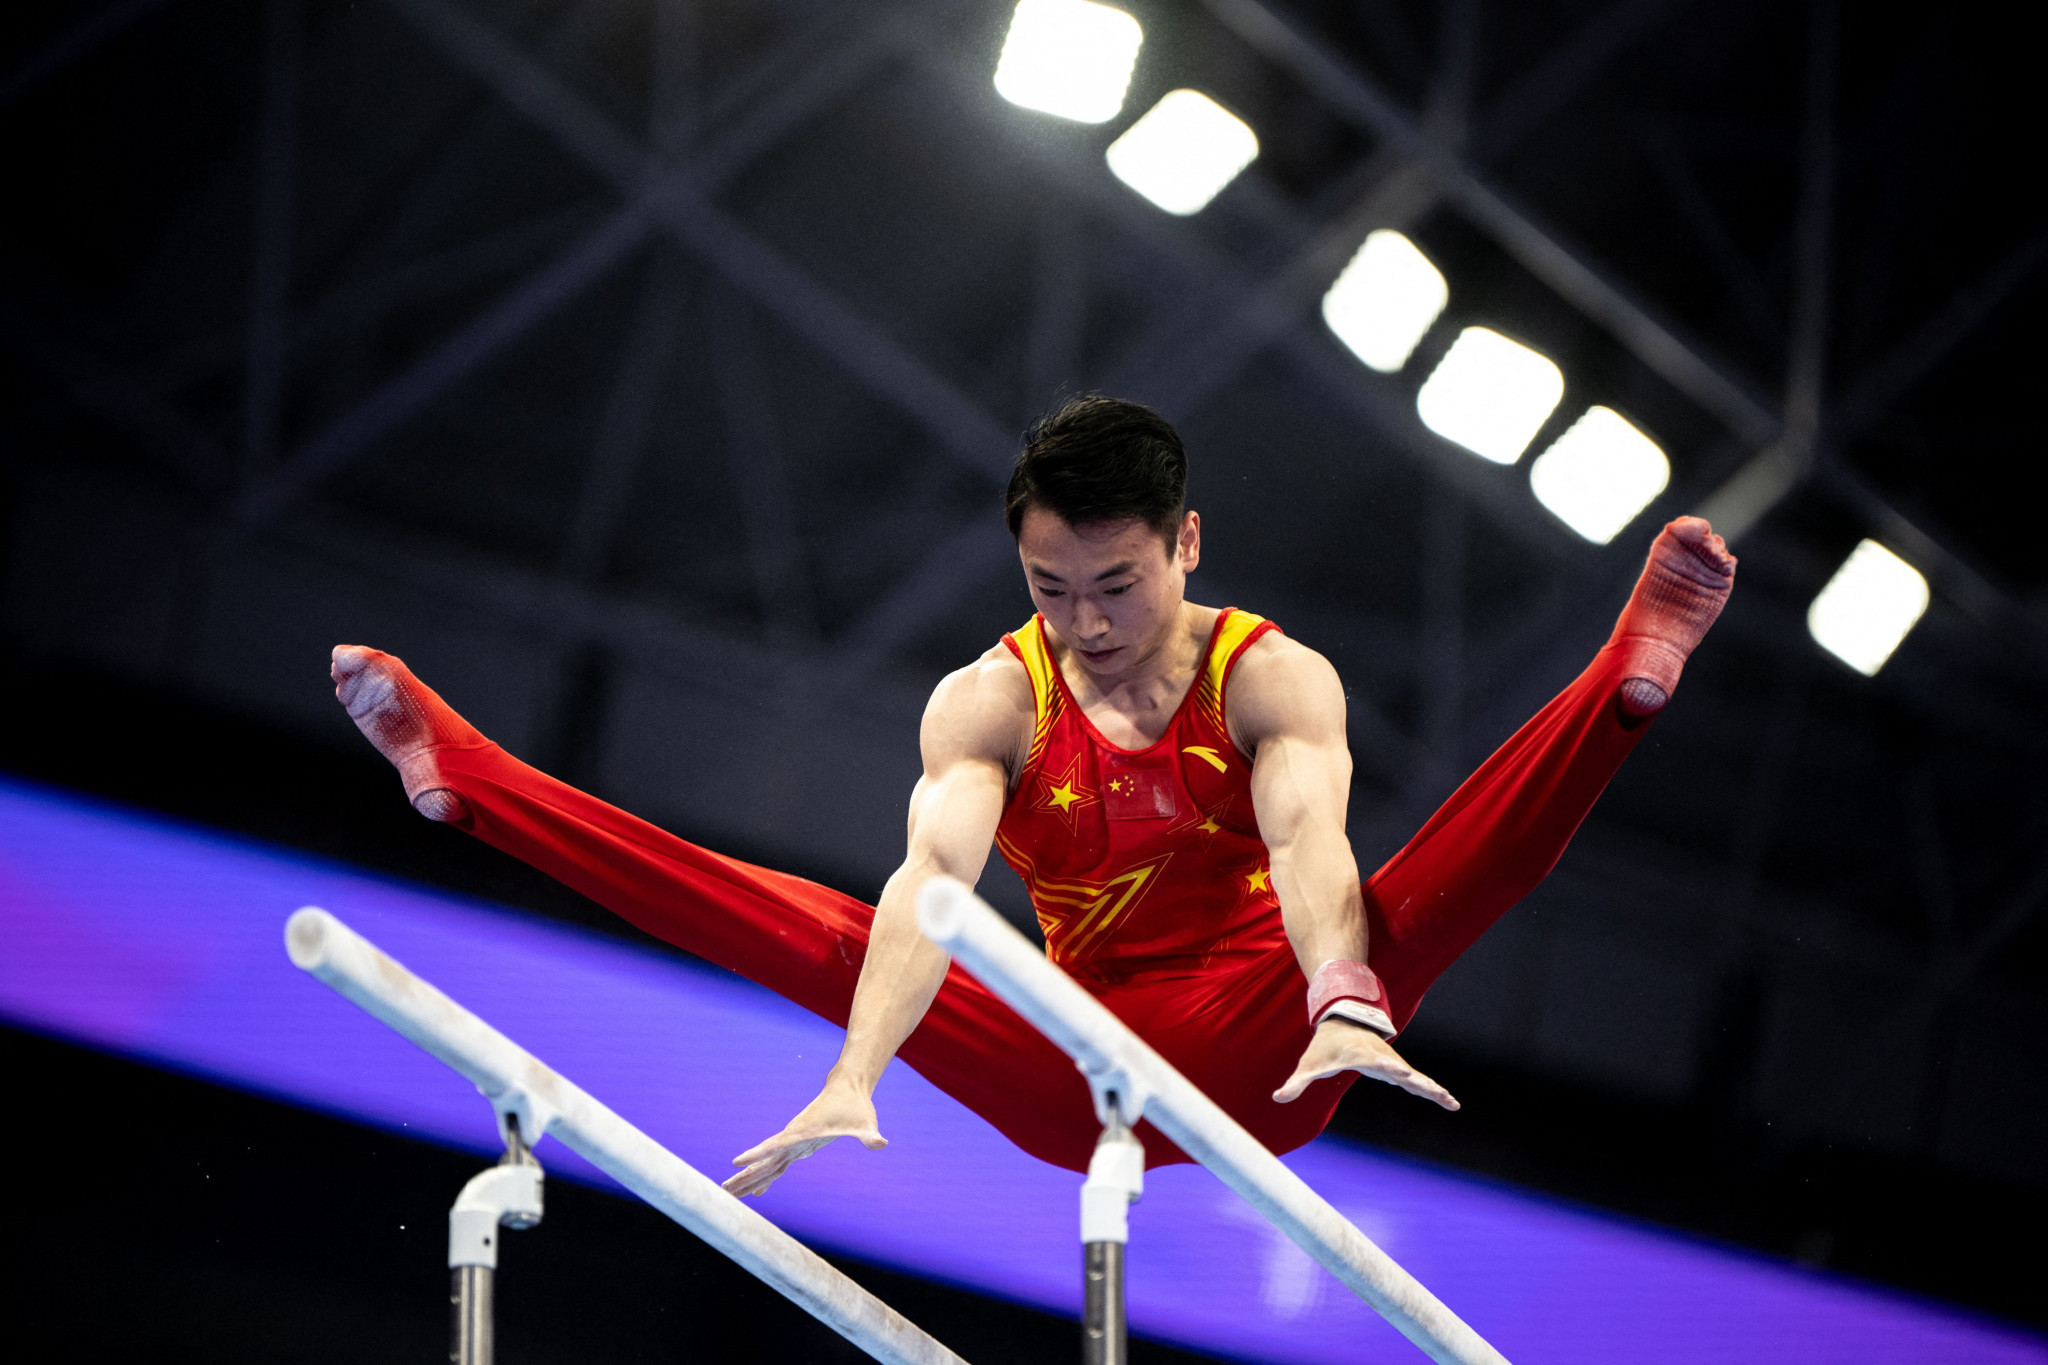 Olympic gold medallist Zou Jingyuan of China defended his parallel bars title from Jakarta-Palembang 2018 with 15.933 points ©Getty Images